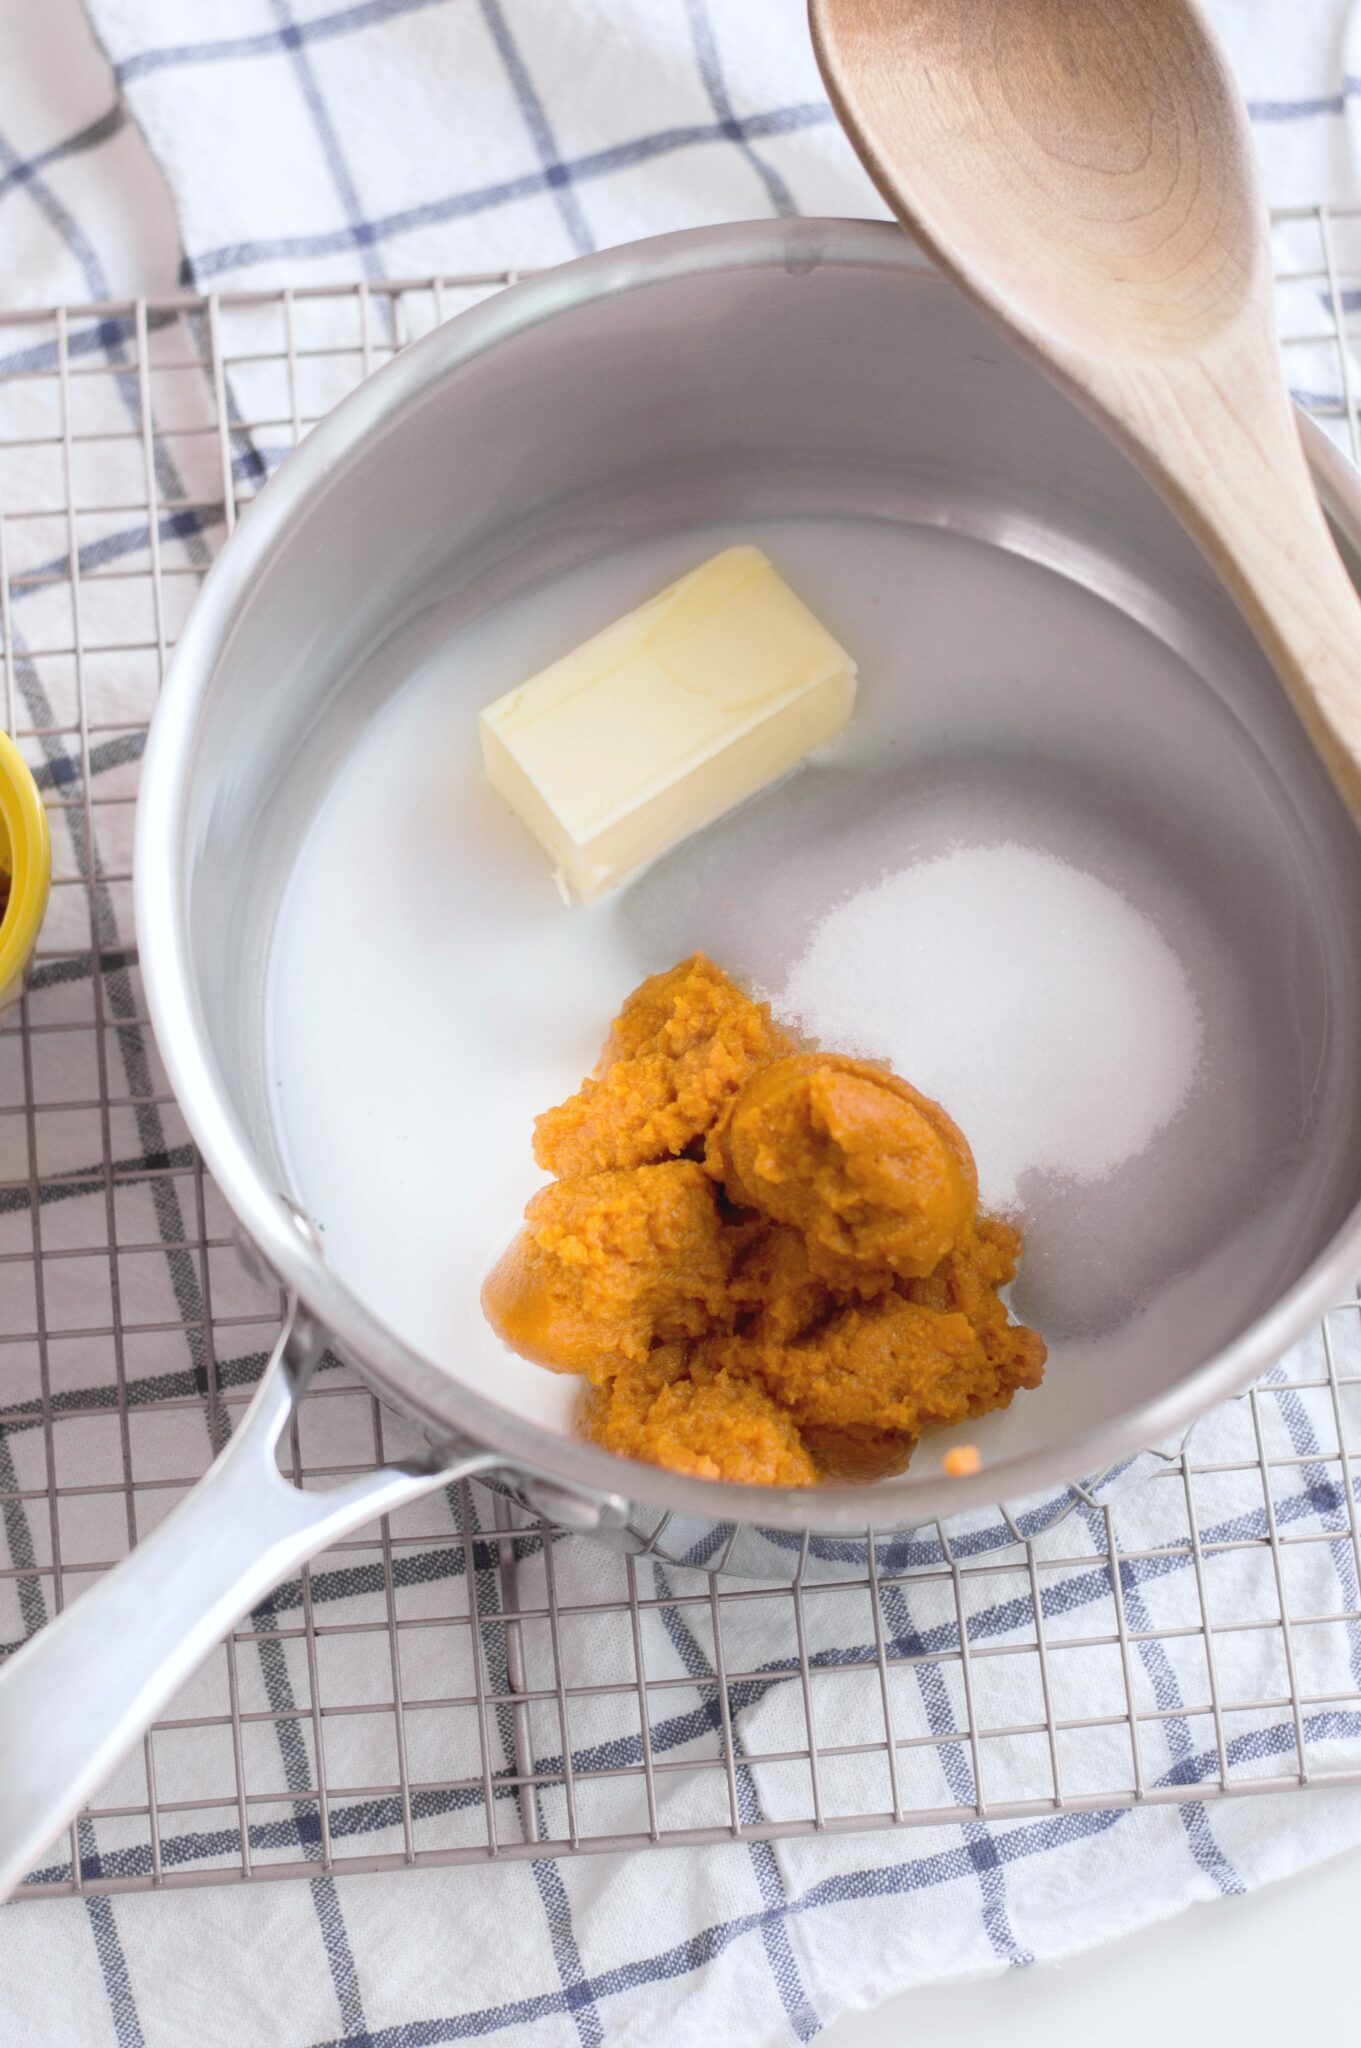 Ingredients in saucepan, sugar, butter, pumpkin puree, and more. A wooden spoon sits on top.